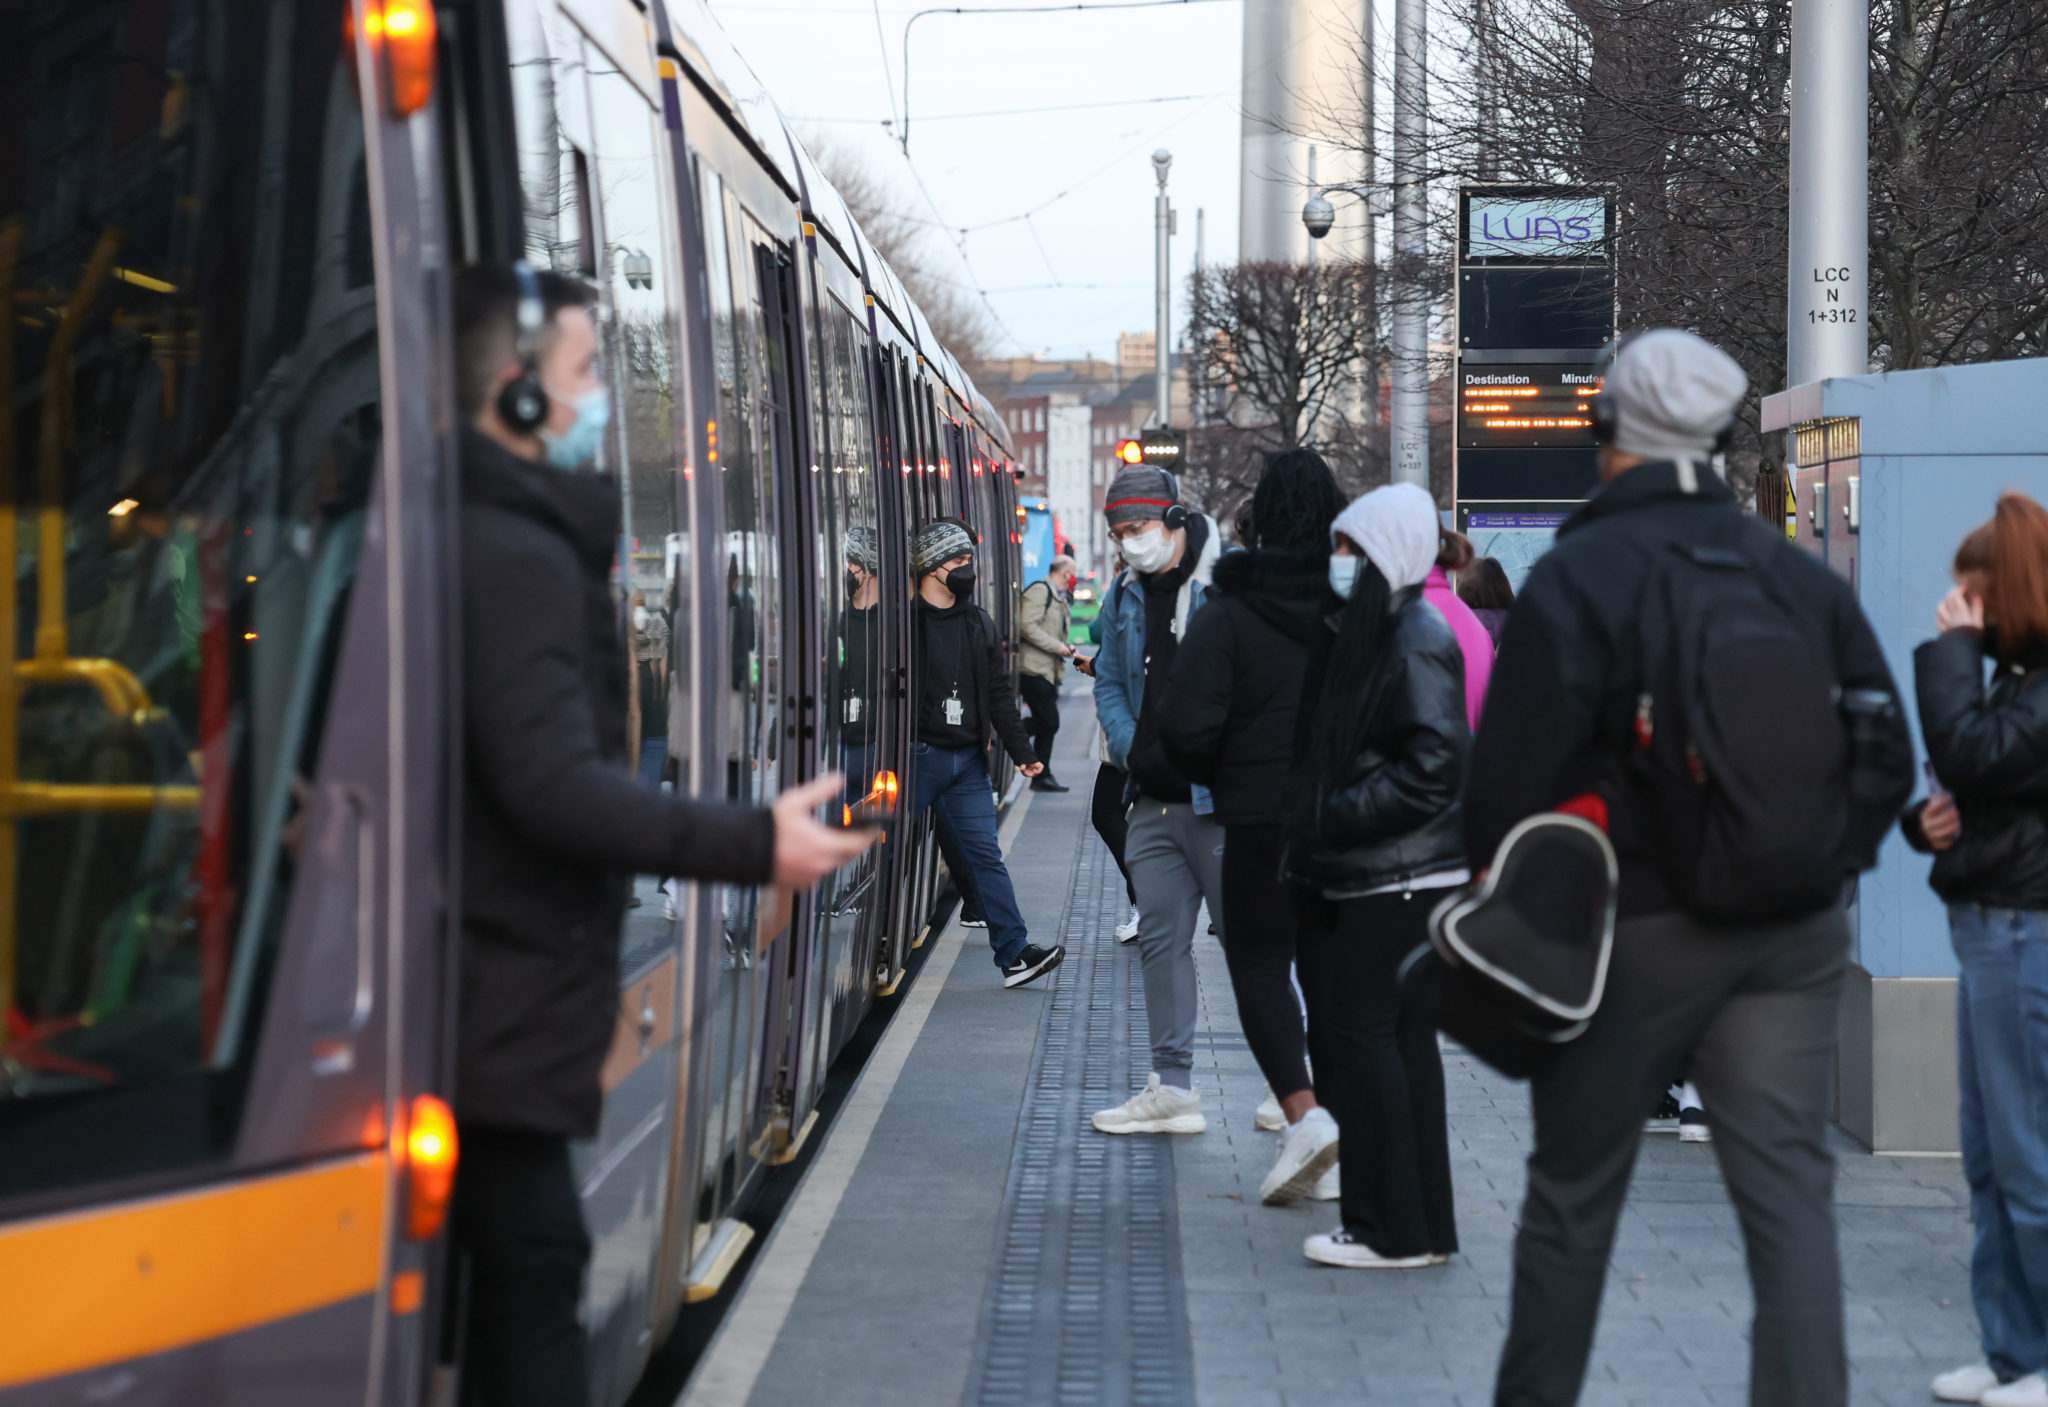 Passengers at O'Connell Street Luas stop in Dublin, 26-01-202. Image: Sam Boal/RollingNews